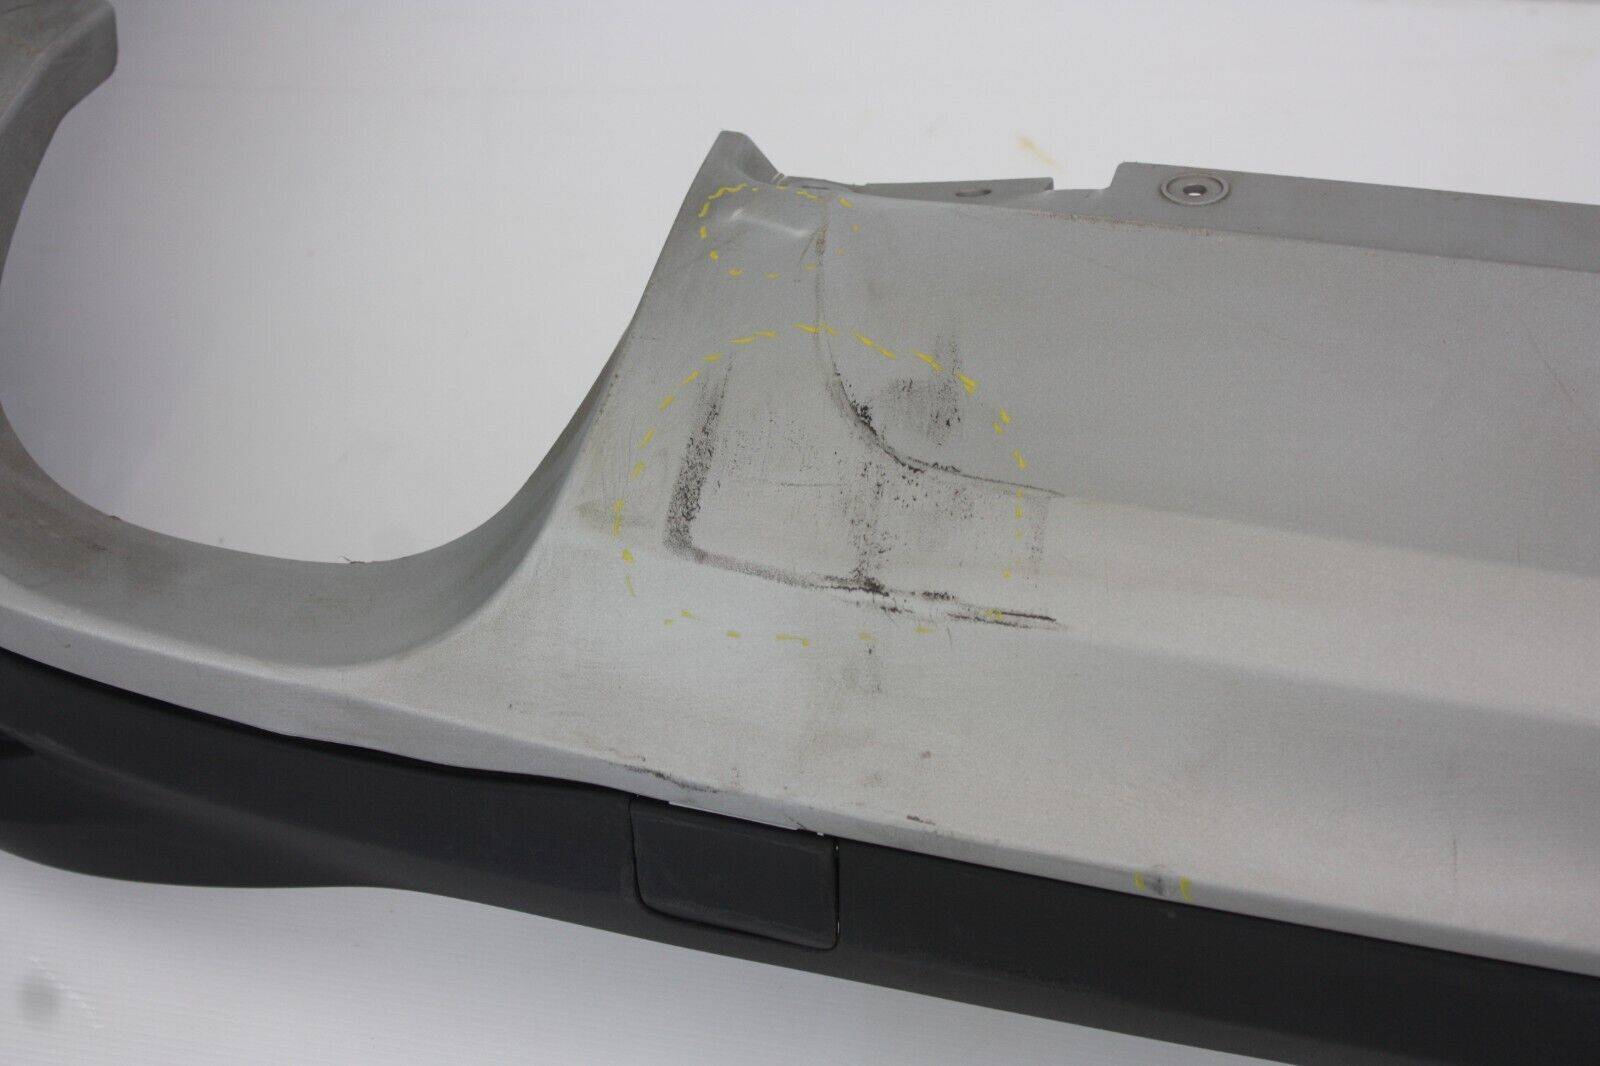 Ford-Focus-Rear-Bumper-Lower-Section-JX7B-17F954-J-Genuine-SEE-PICS-175467150053-2